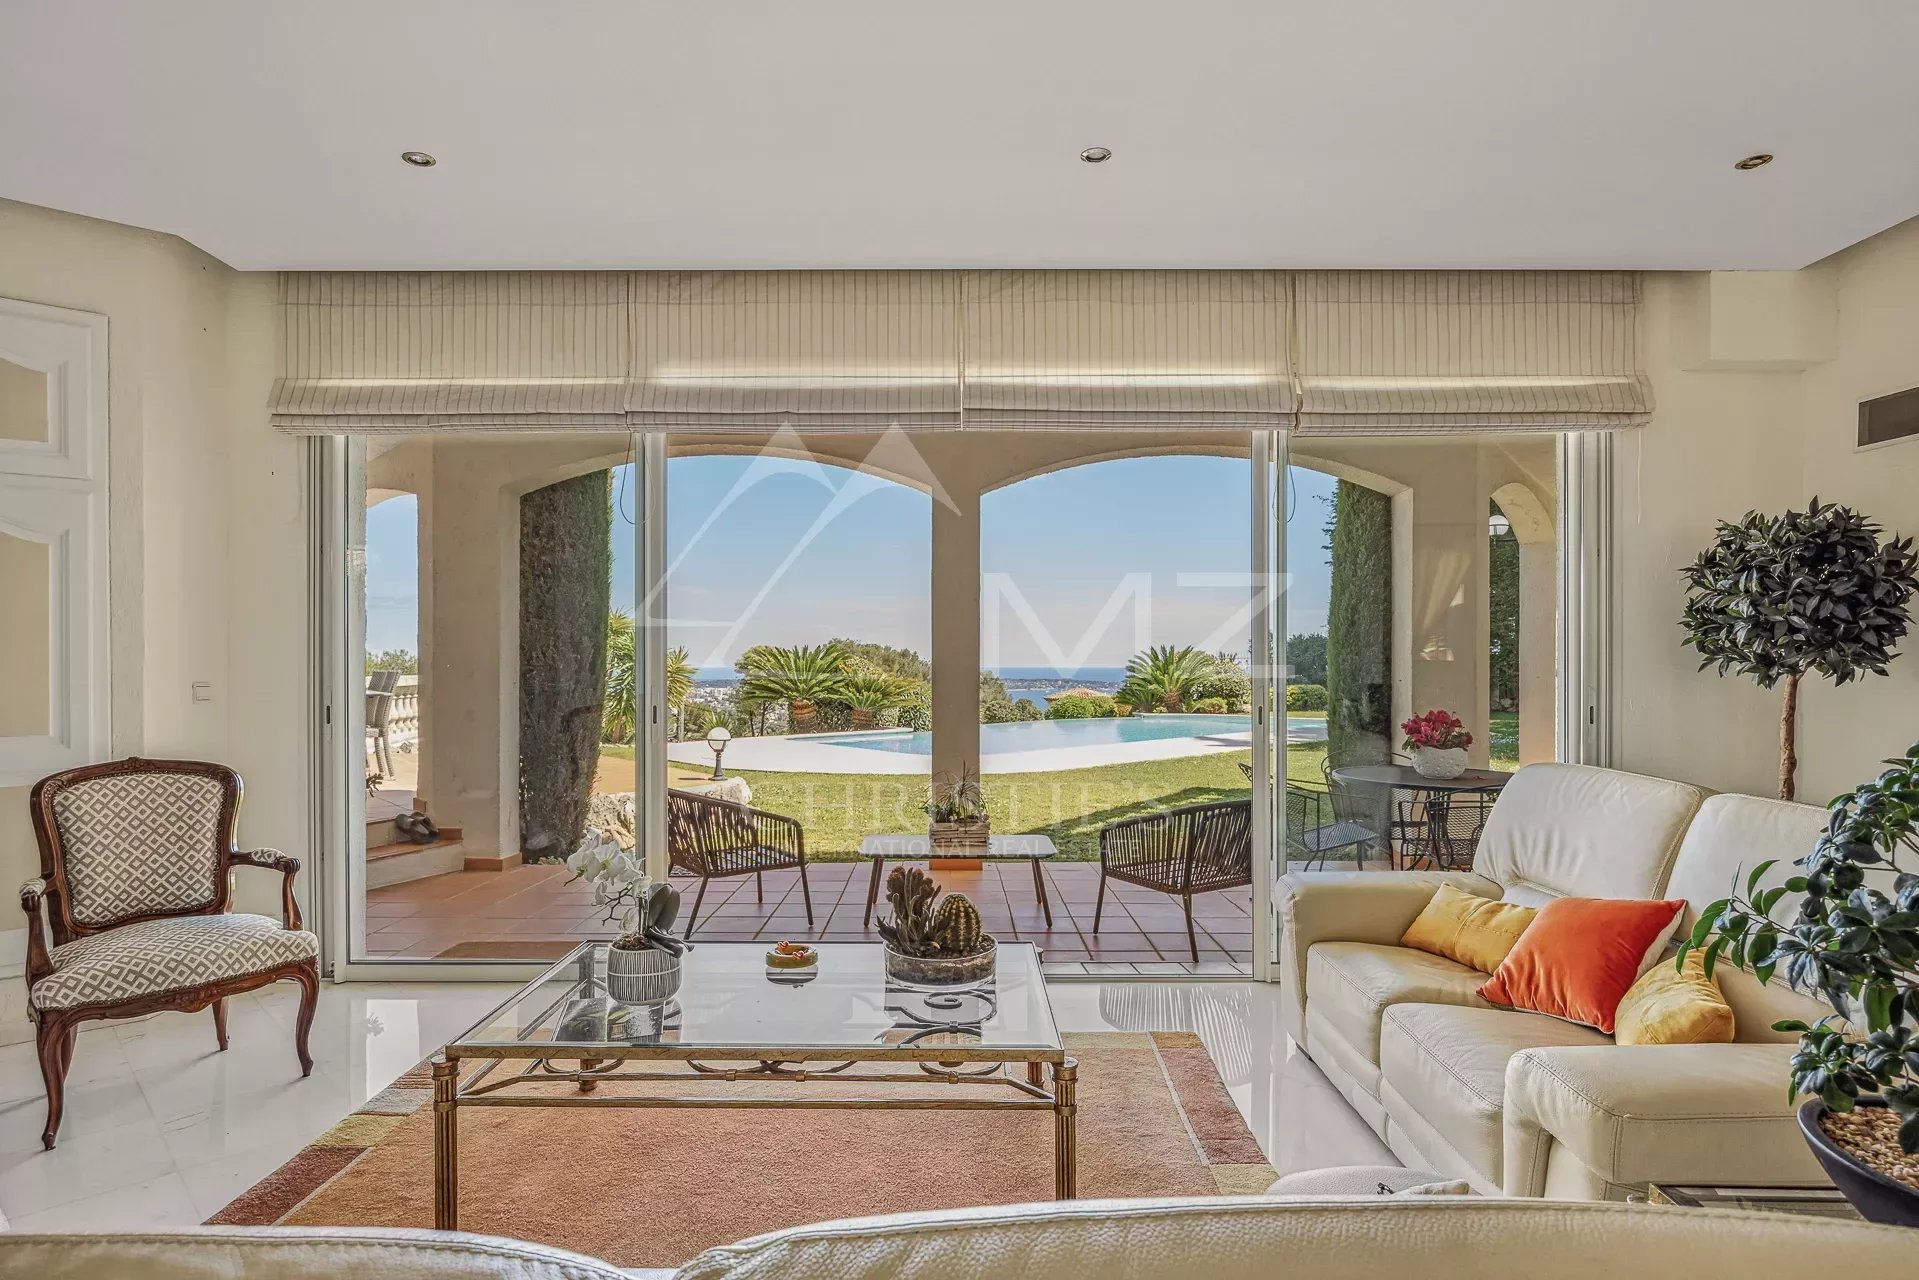 Close to Cannes - Vallauris - Panoramic sea view